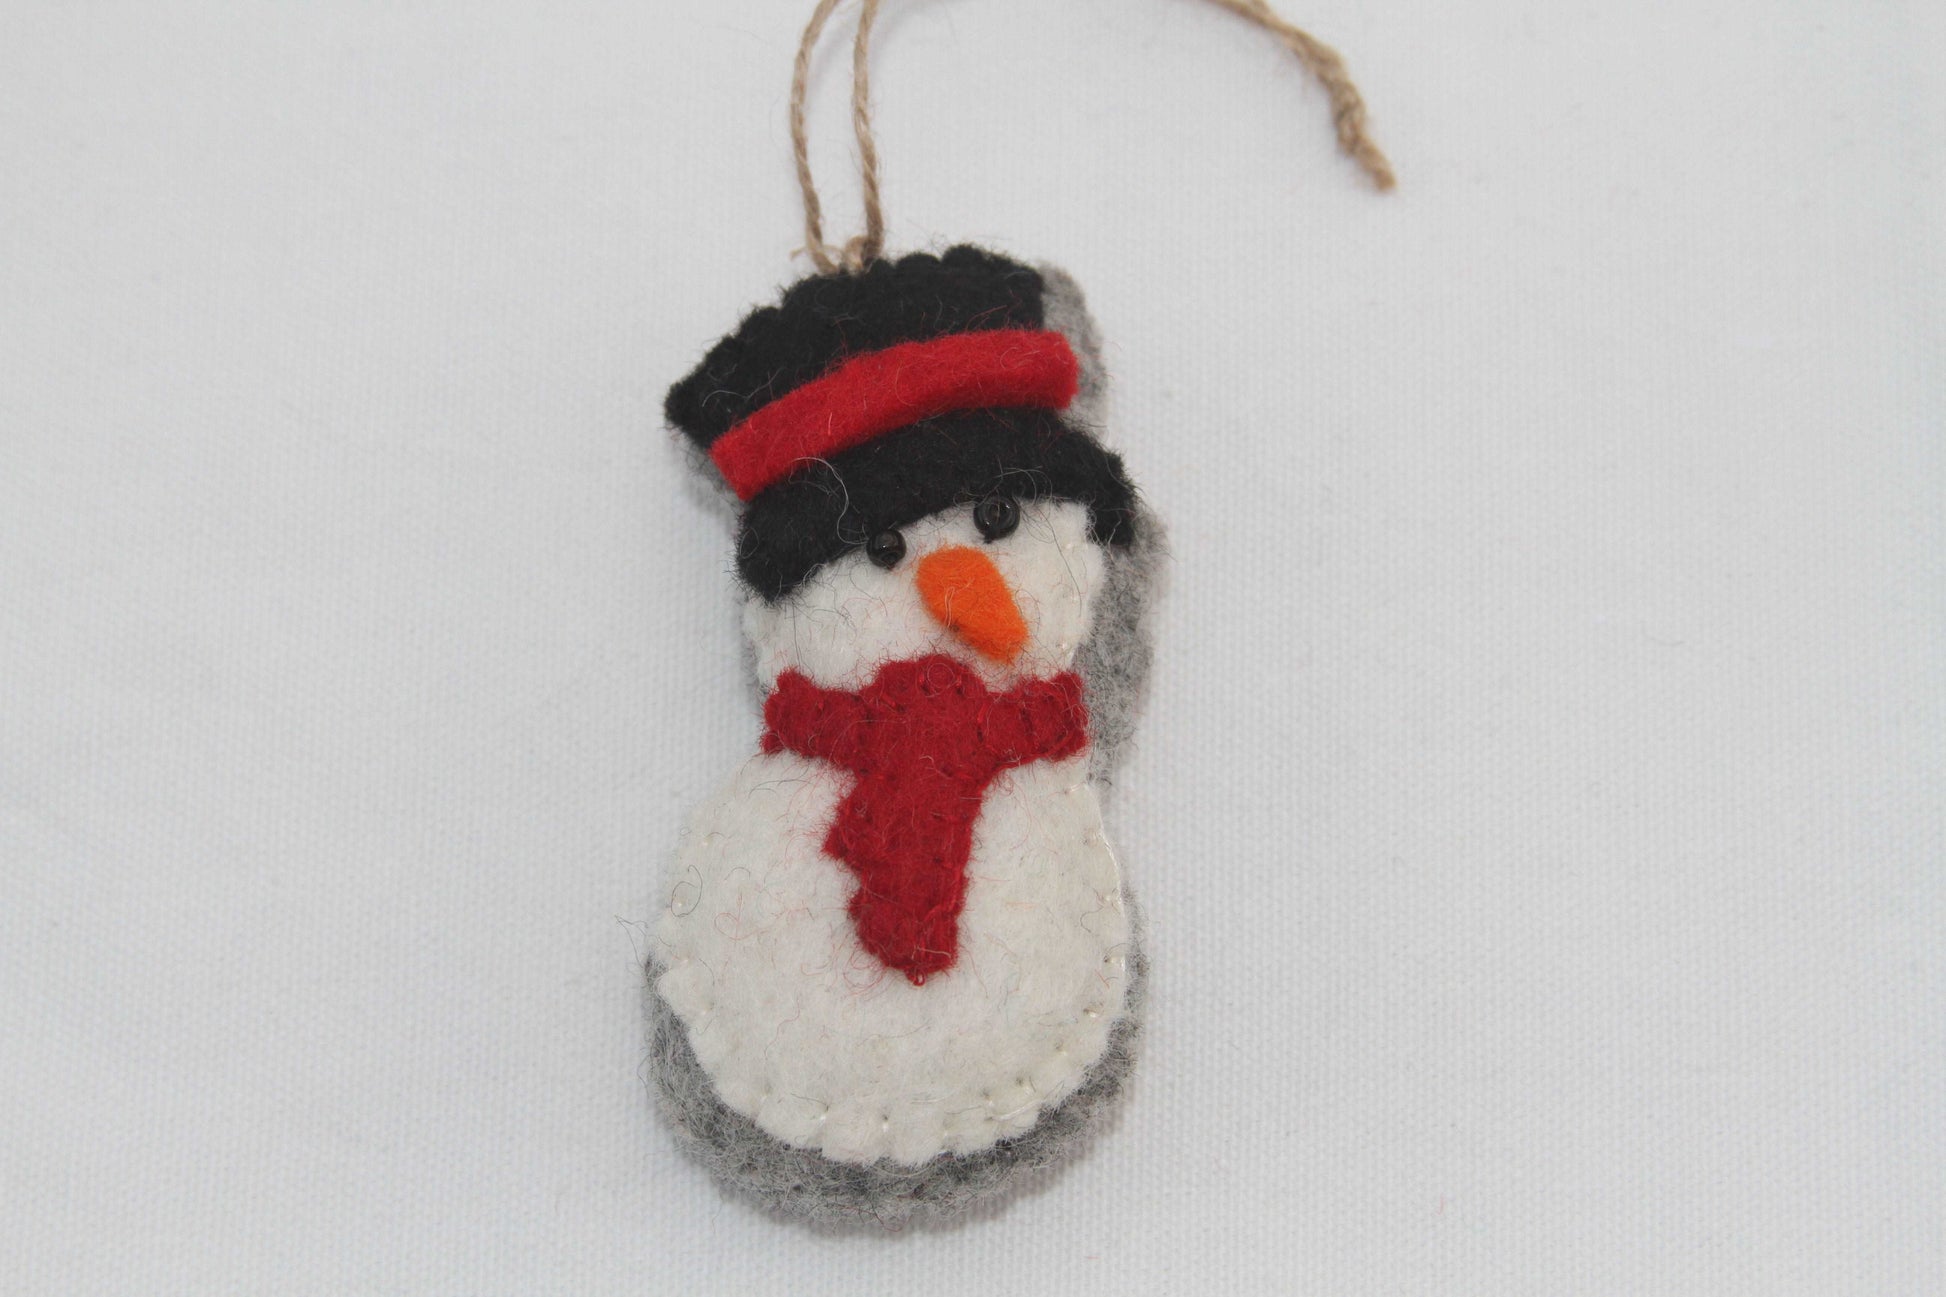 This Global Groove Life, handmade, ethical, fair trade, eco-friendly, sustainable, black, white and red snowman with top hat ornament was created by artisans in Kathmandu Nepal and will be a beautiful addition to your Christmas tree this holiday season.